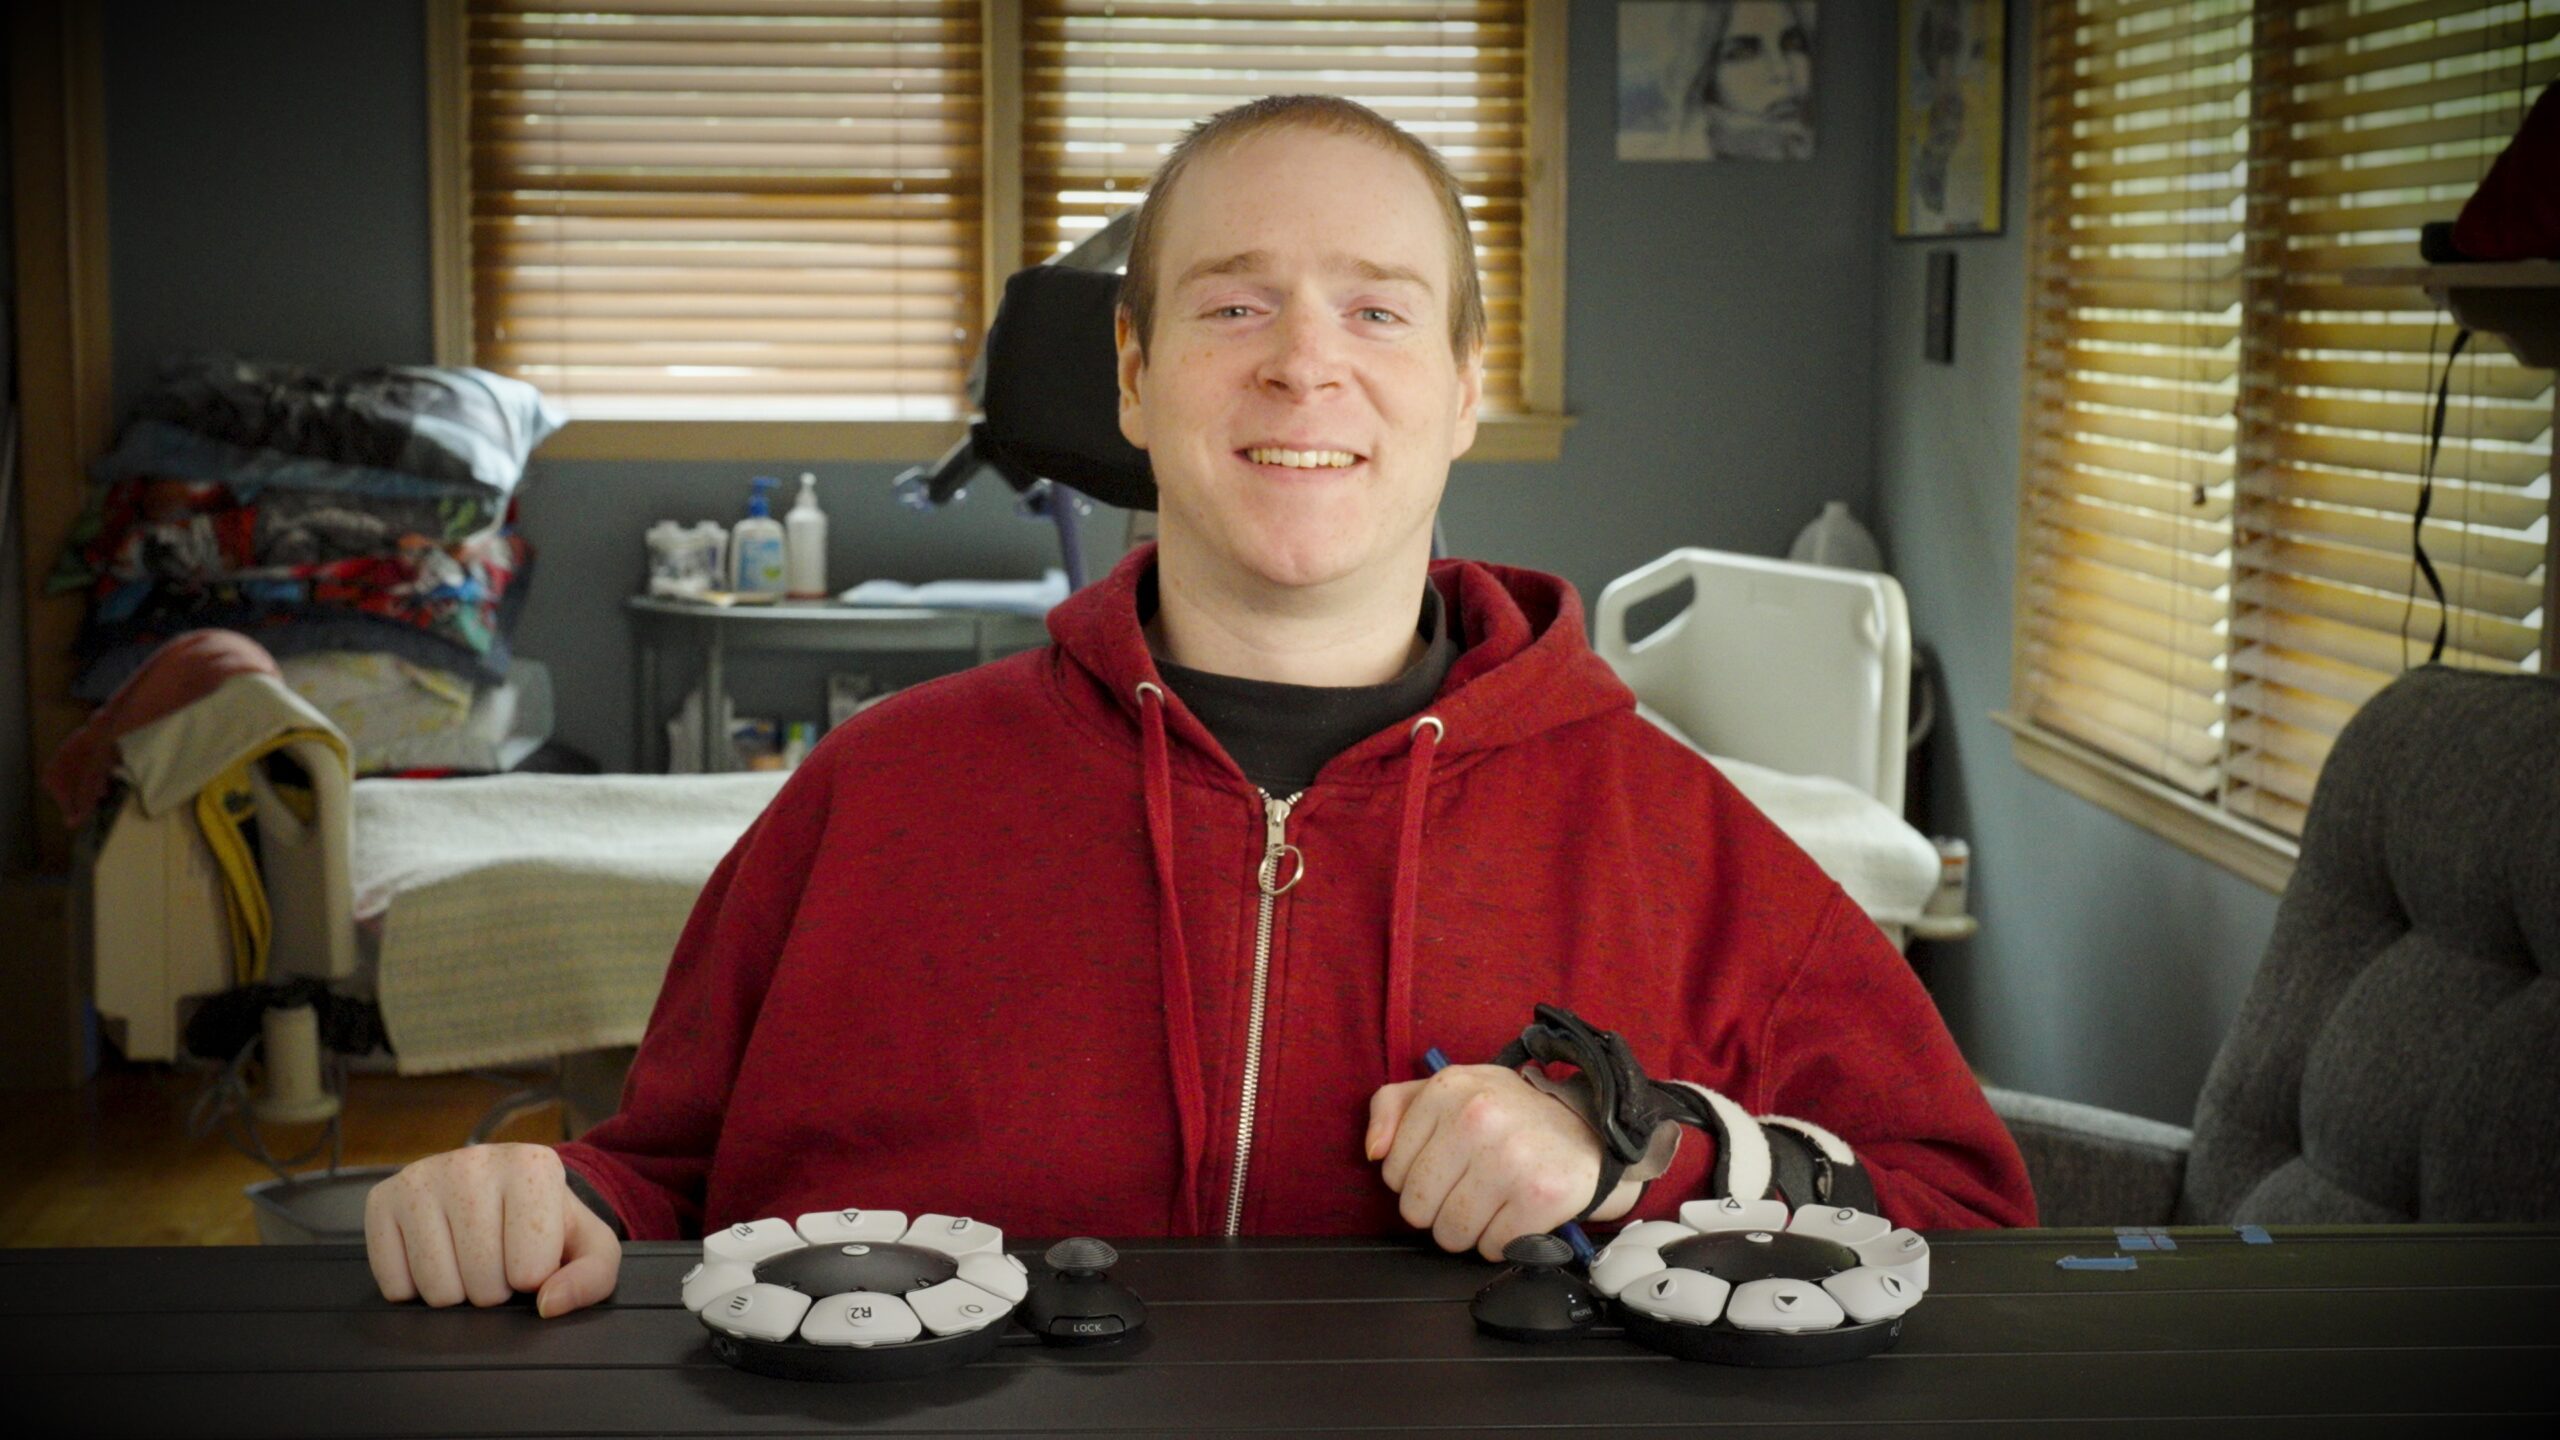 New Access controller accessibility consultants spotlight video and setup tutorials – PlayStation.Blog